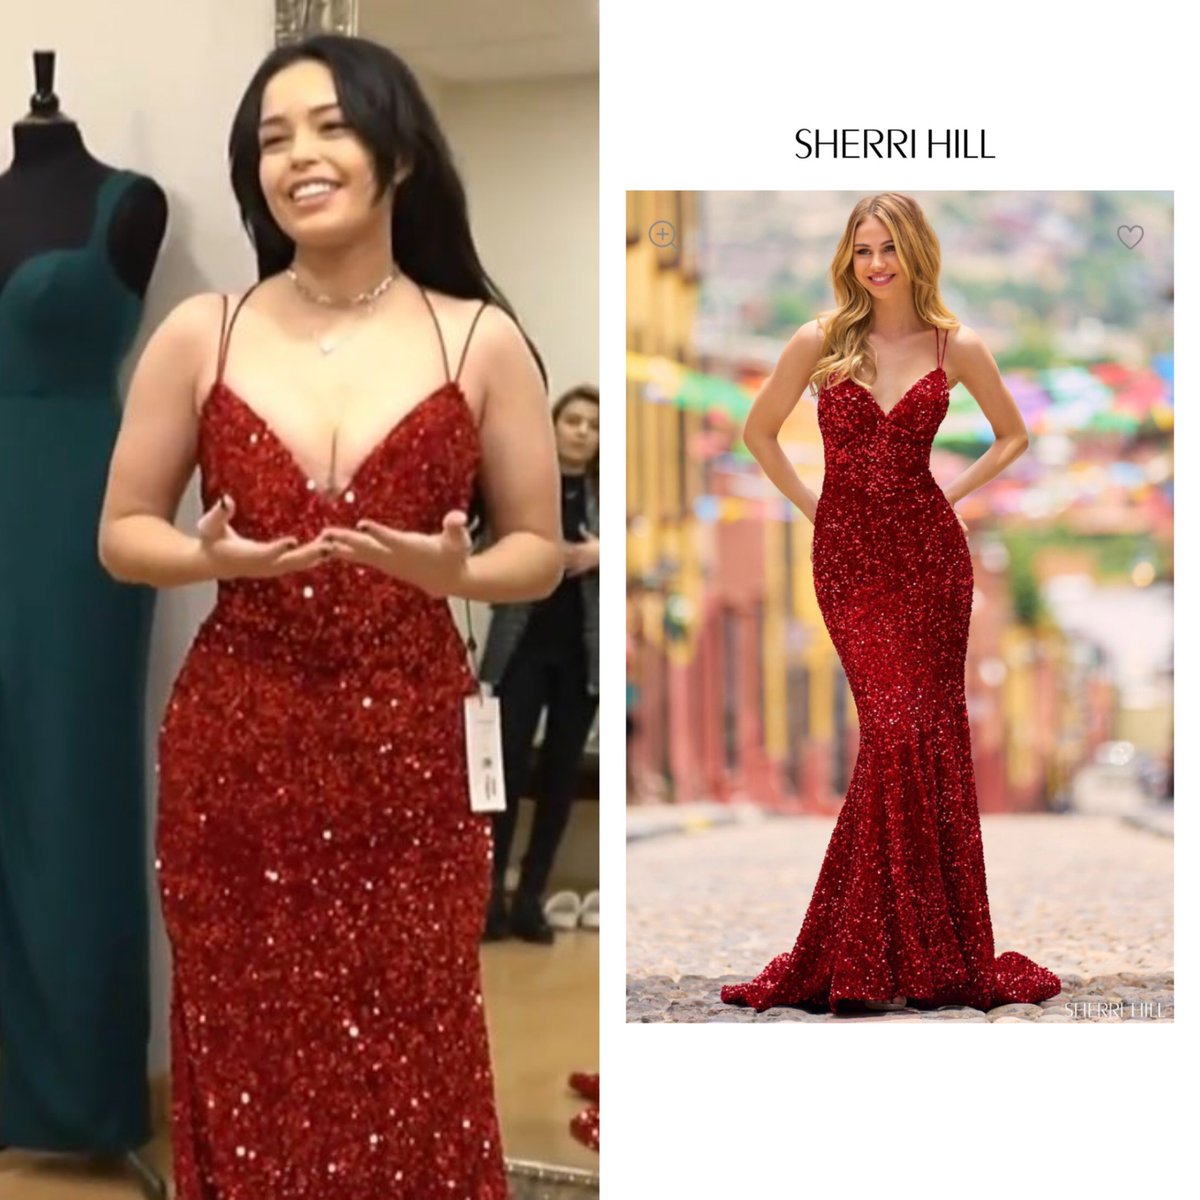 dress 2 : @SherriHill gown in red ($556.95)